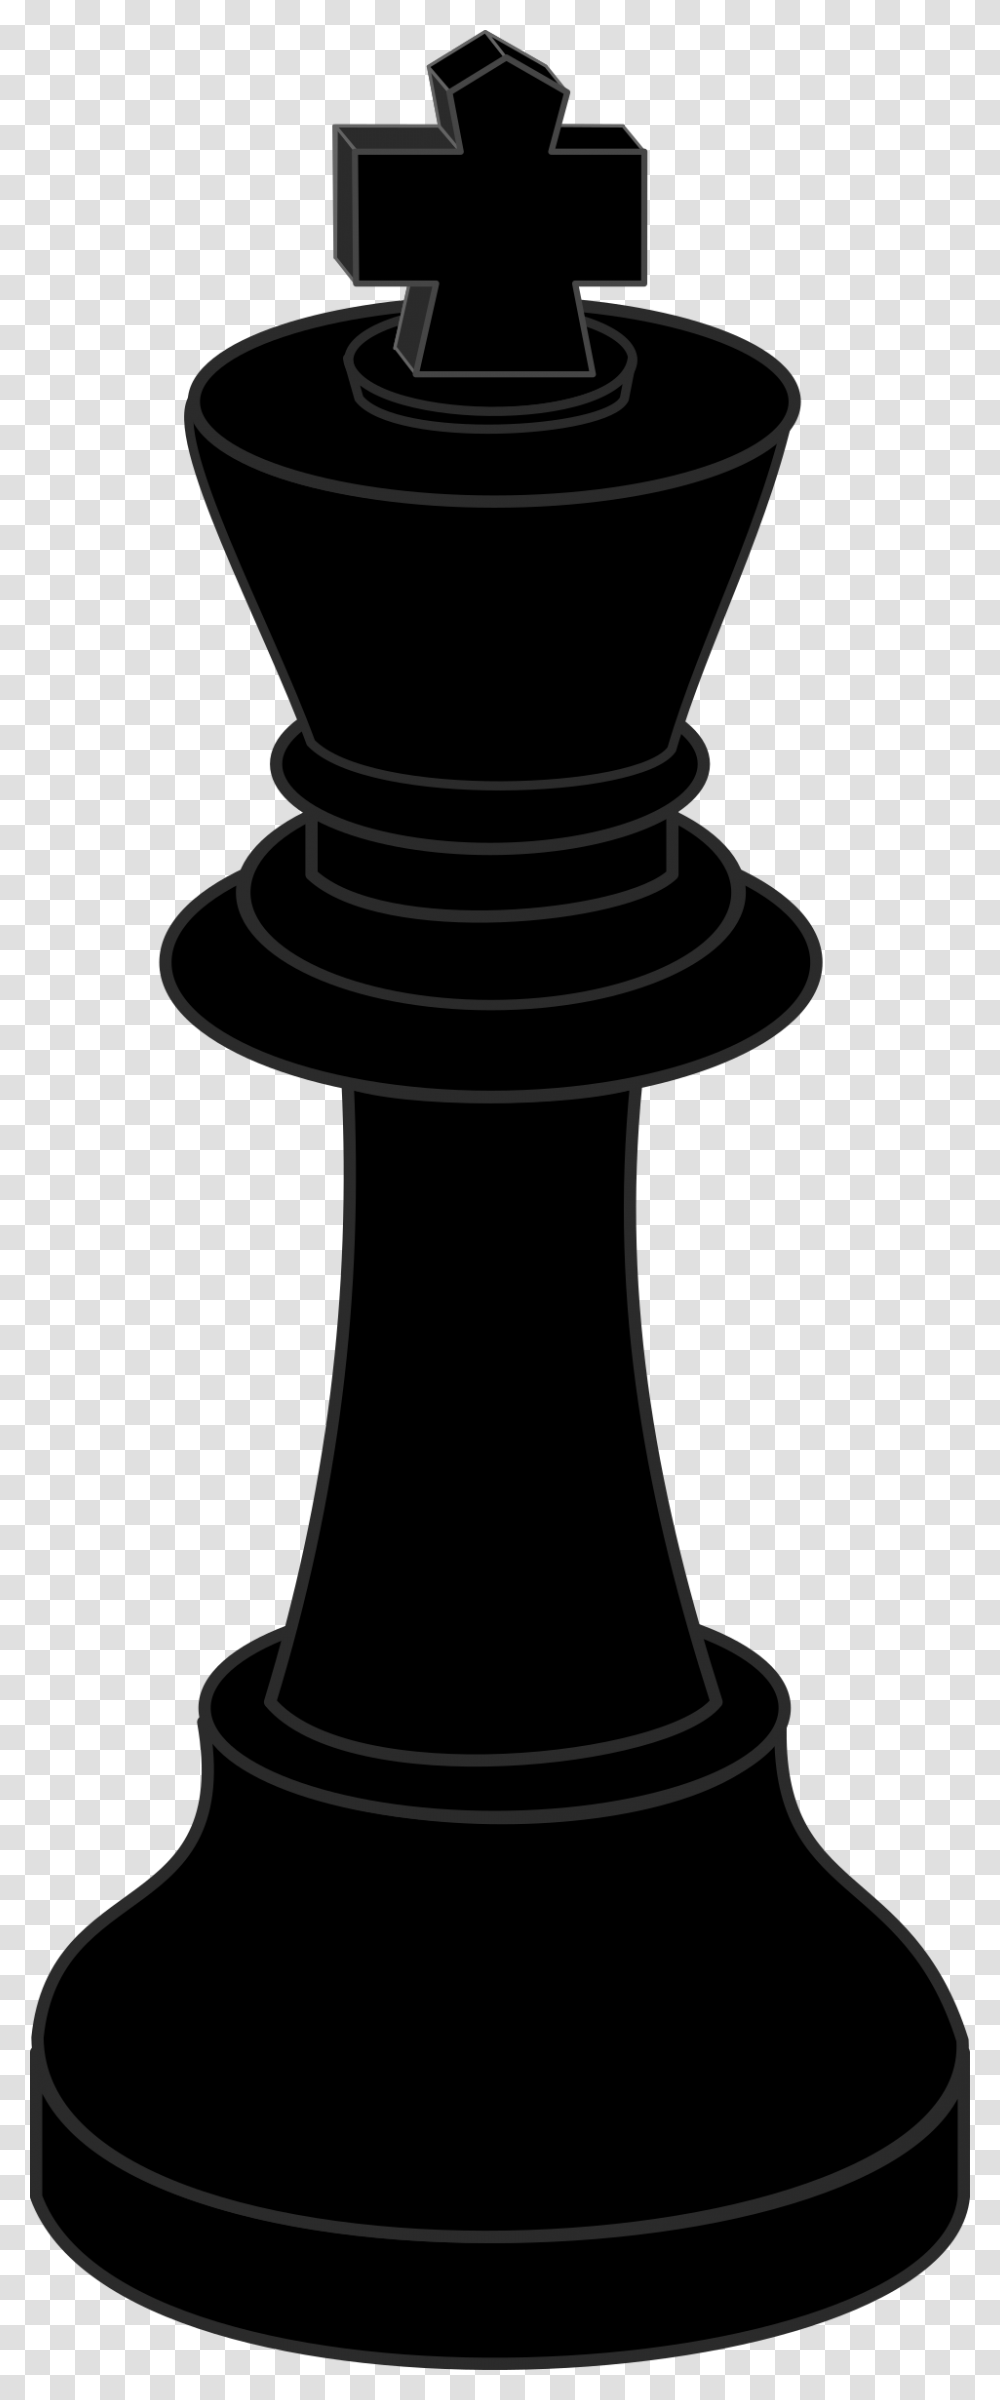 Chess Piece Black King King Chess Piece, Lamp Transparent Png